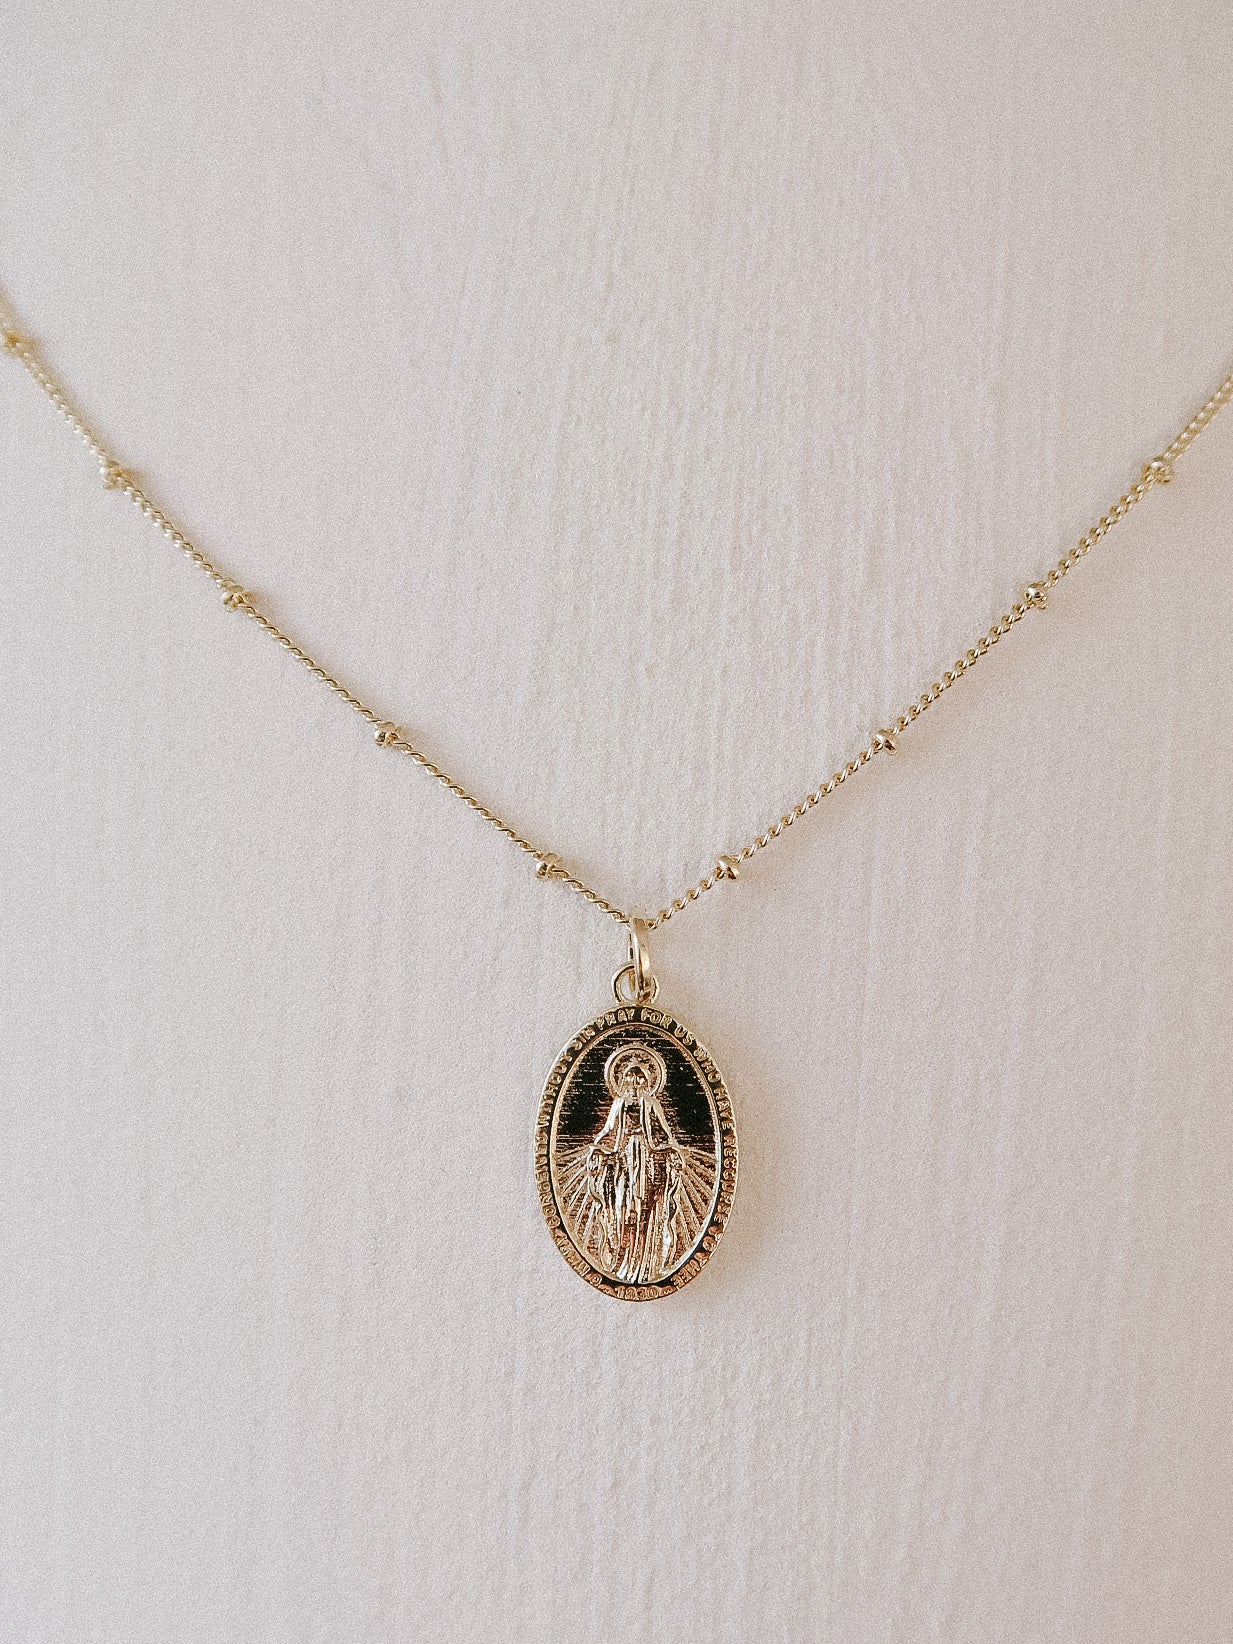 Miraculous_Medal_Gold_Filled_Necklace_Chain_Virgin_Mary_Satellite